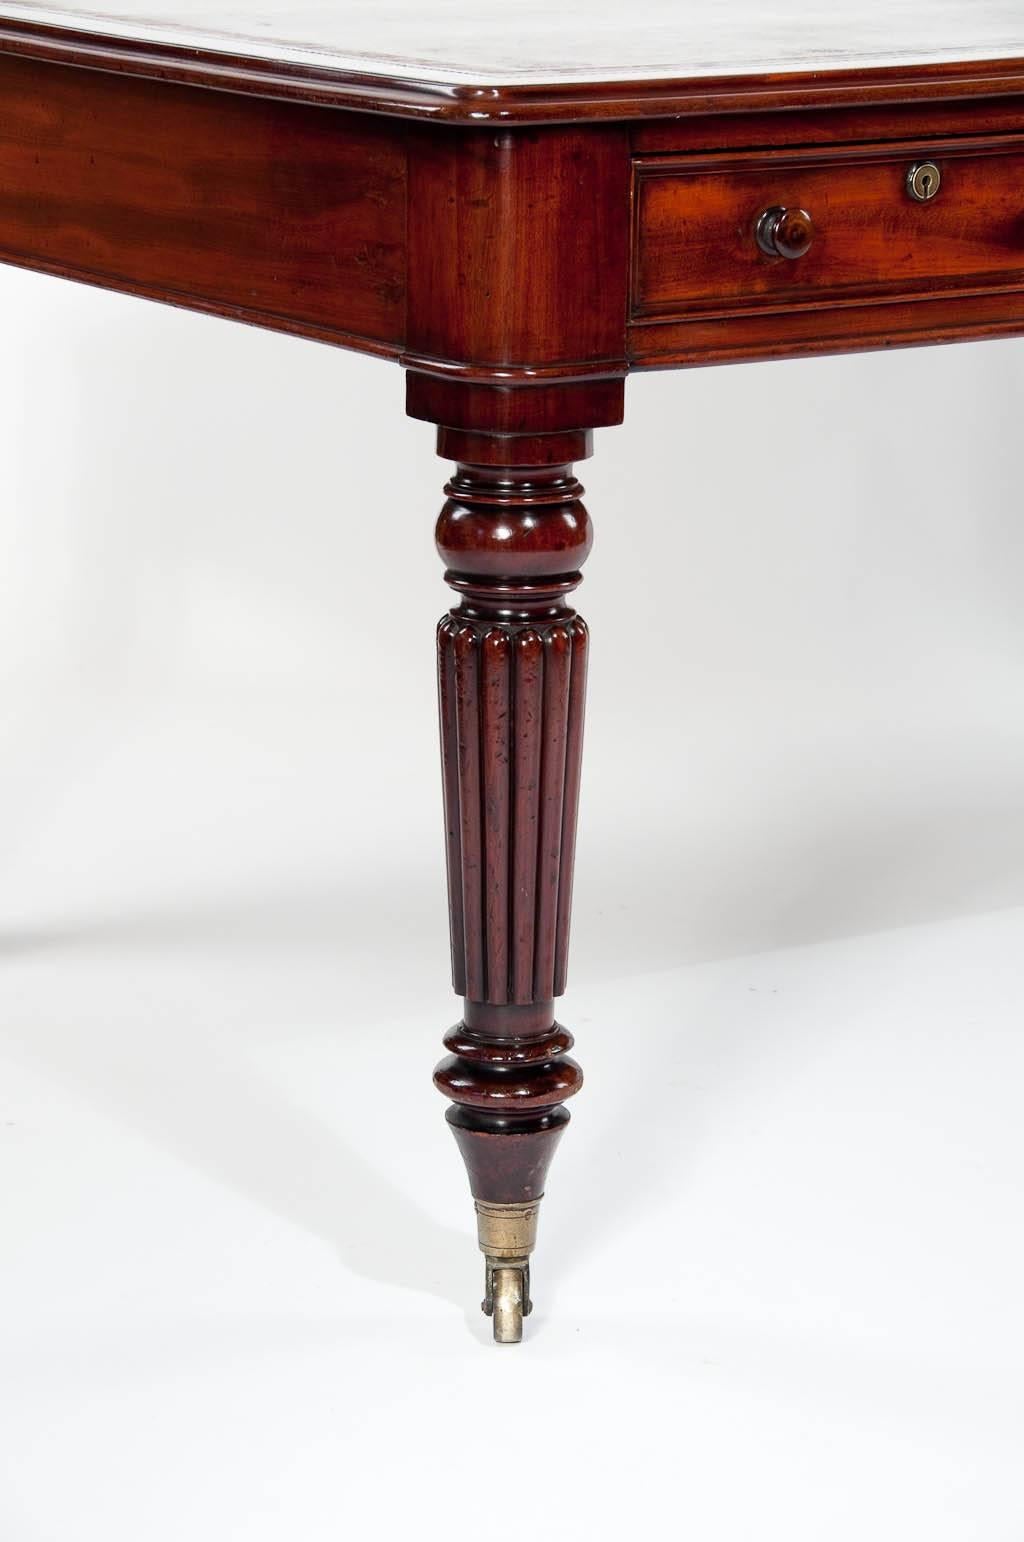 Great Britain (UK) Antique Partners Writing Table by M. Wilson